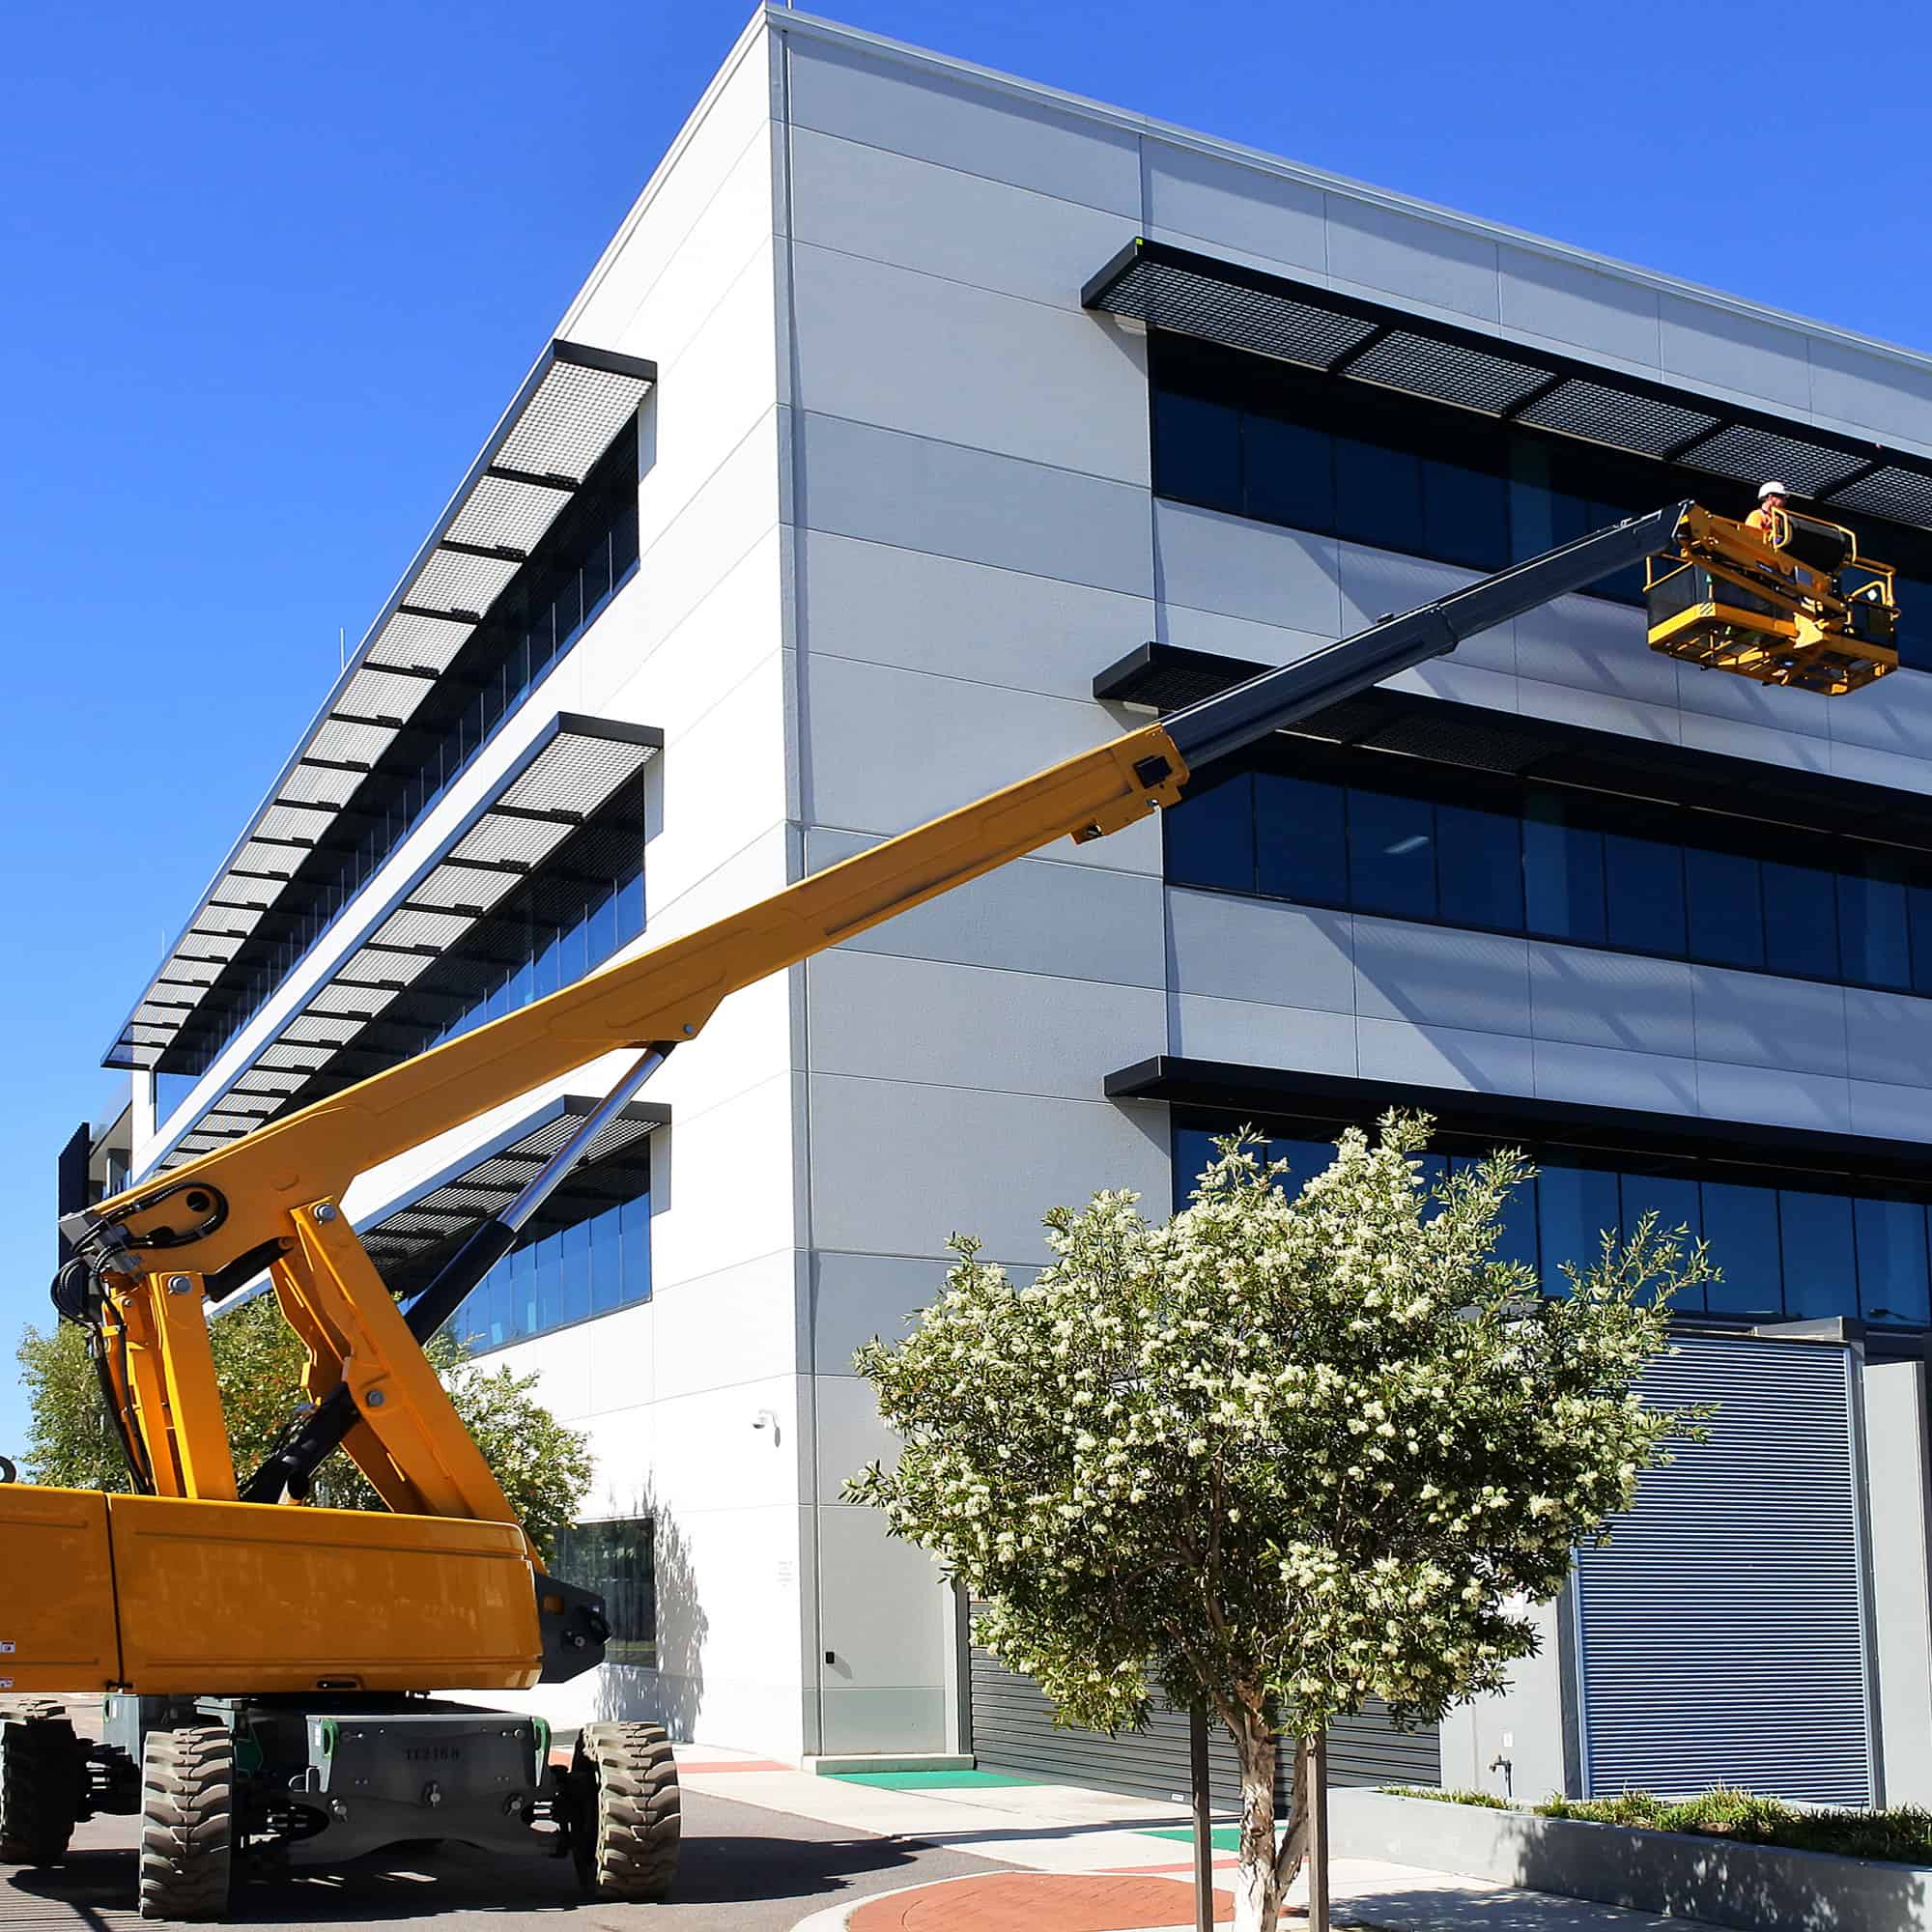 A fully extended boom lift holding a construction worker next to the top story window of an office building